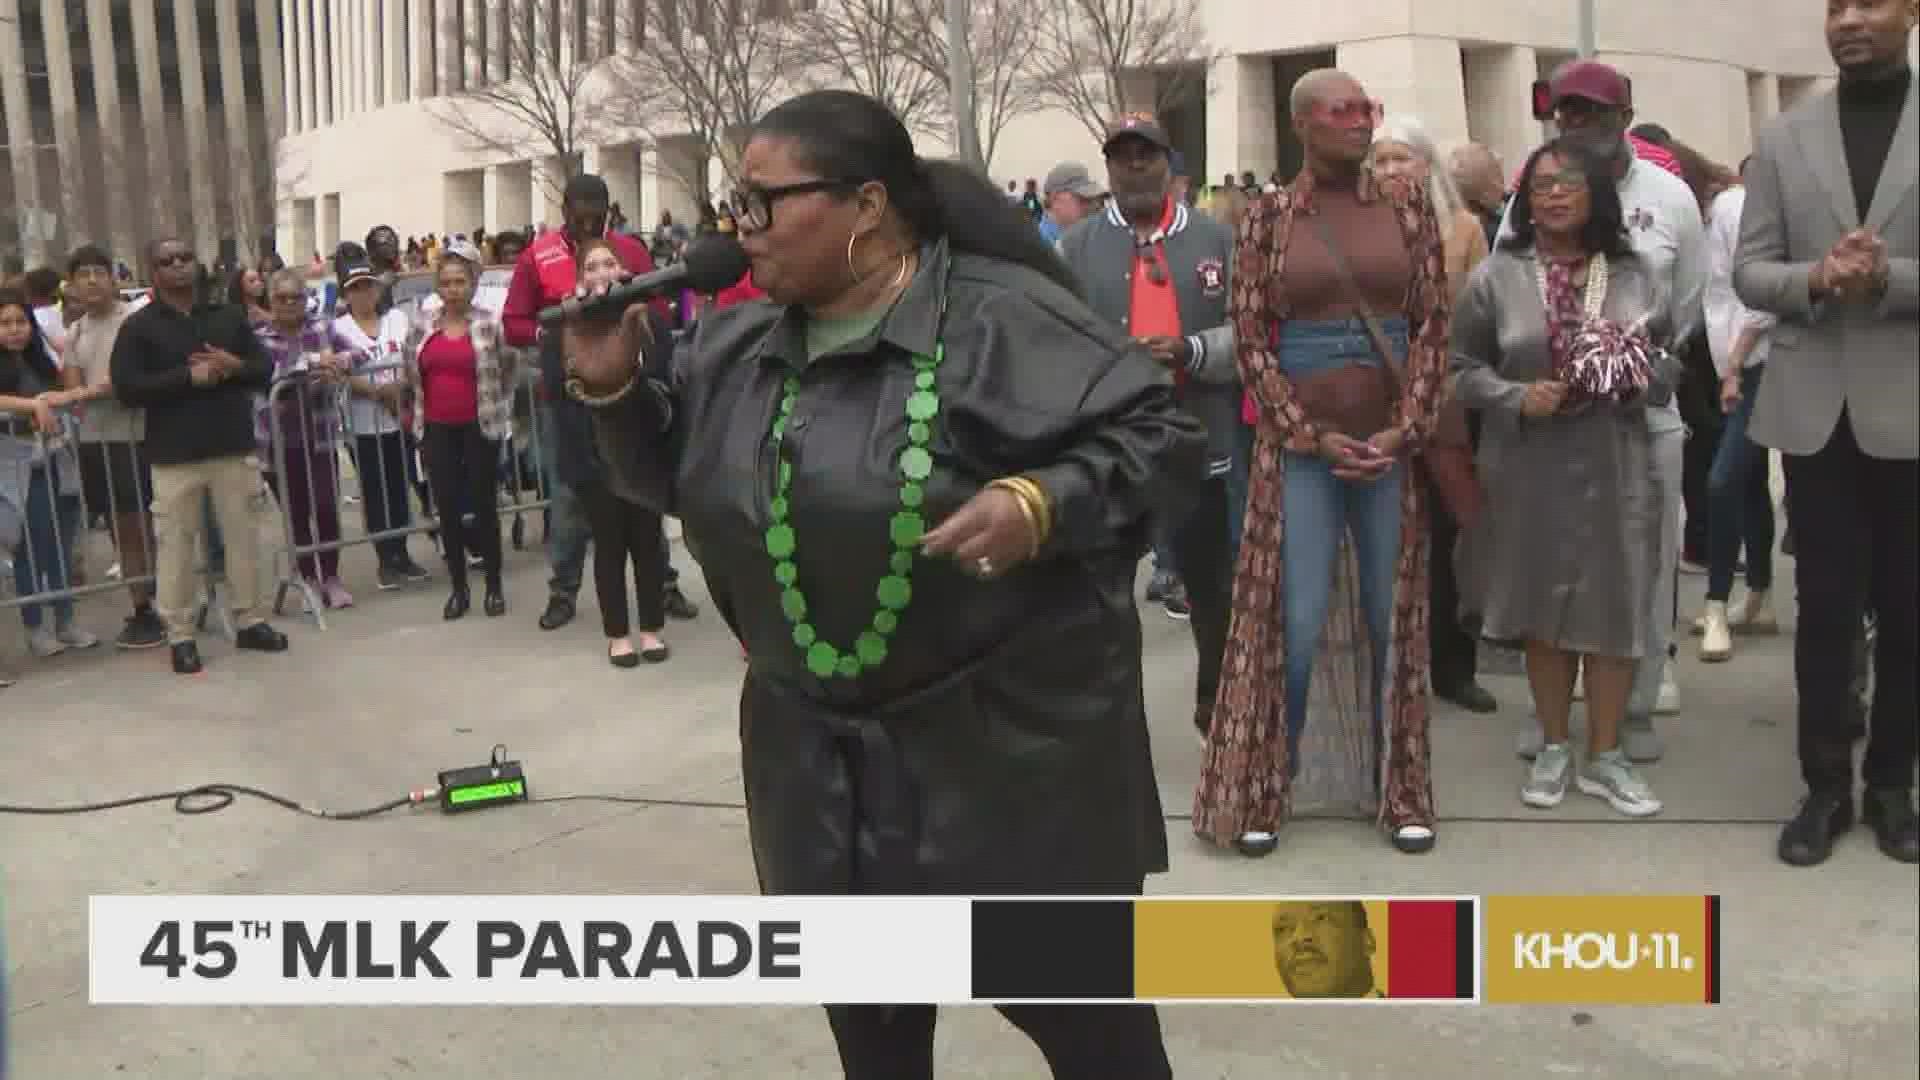 Before the parade got underway Monday, Mayor Sylvester Turner led the opening ceremonies.